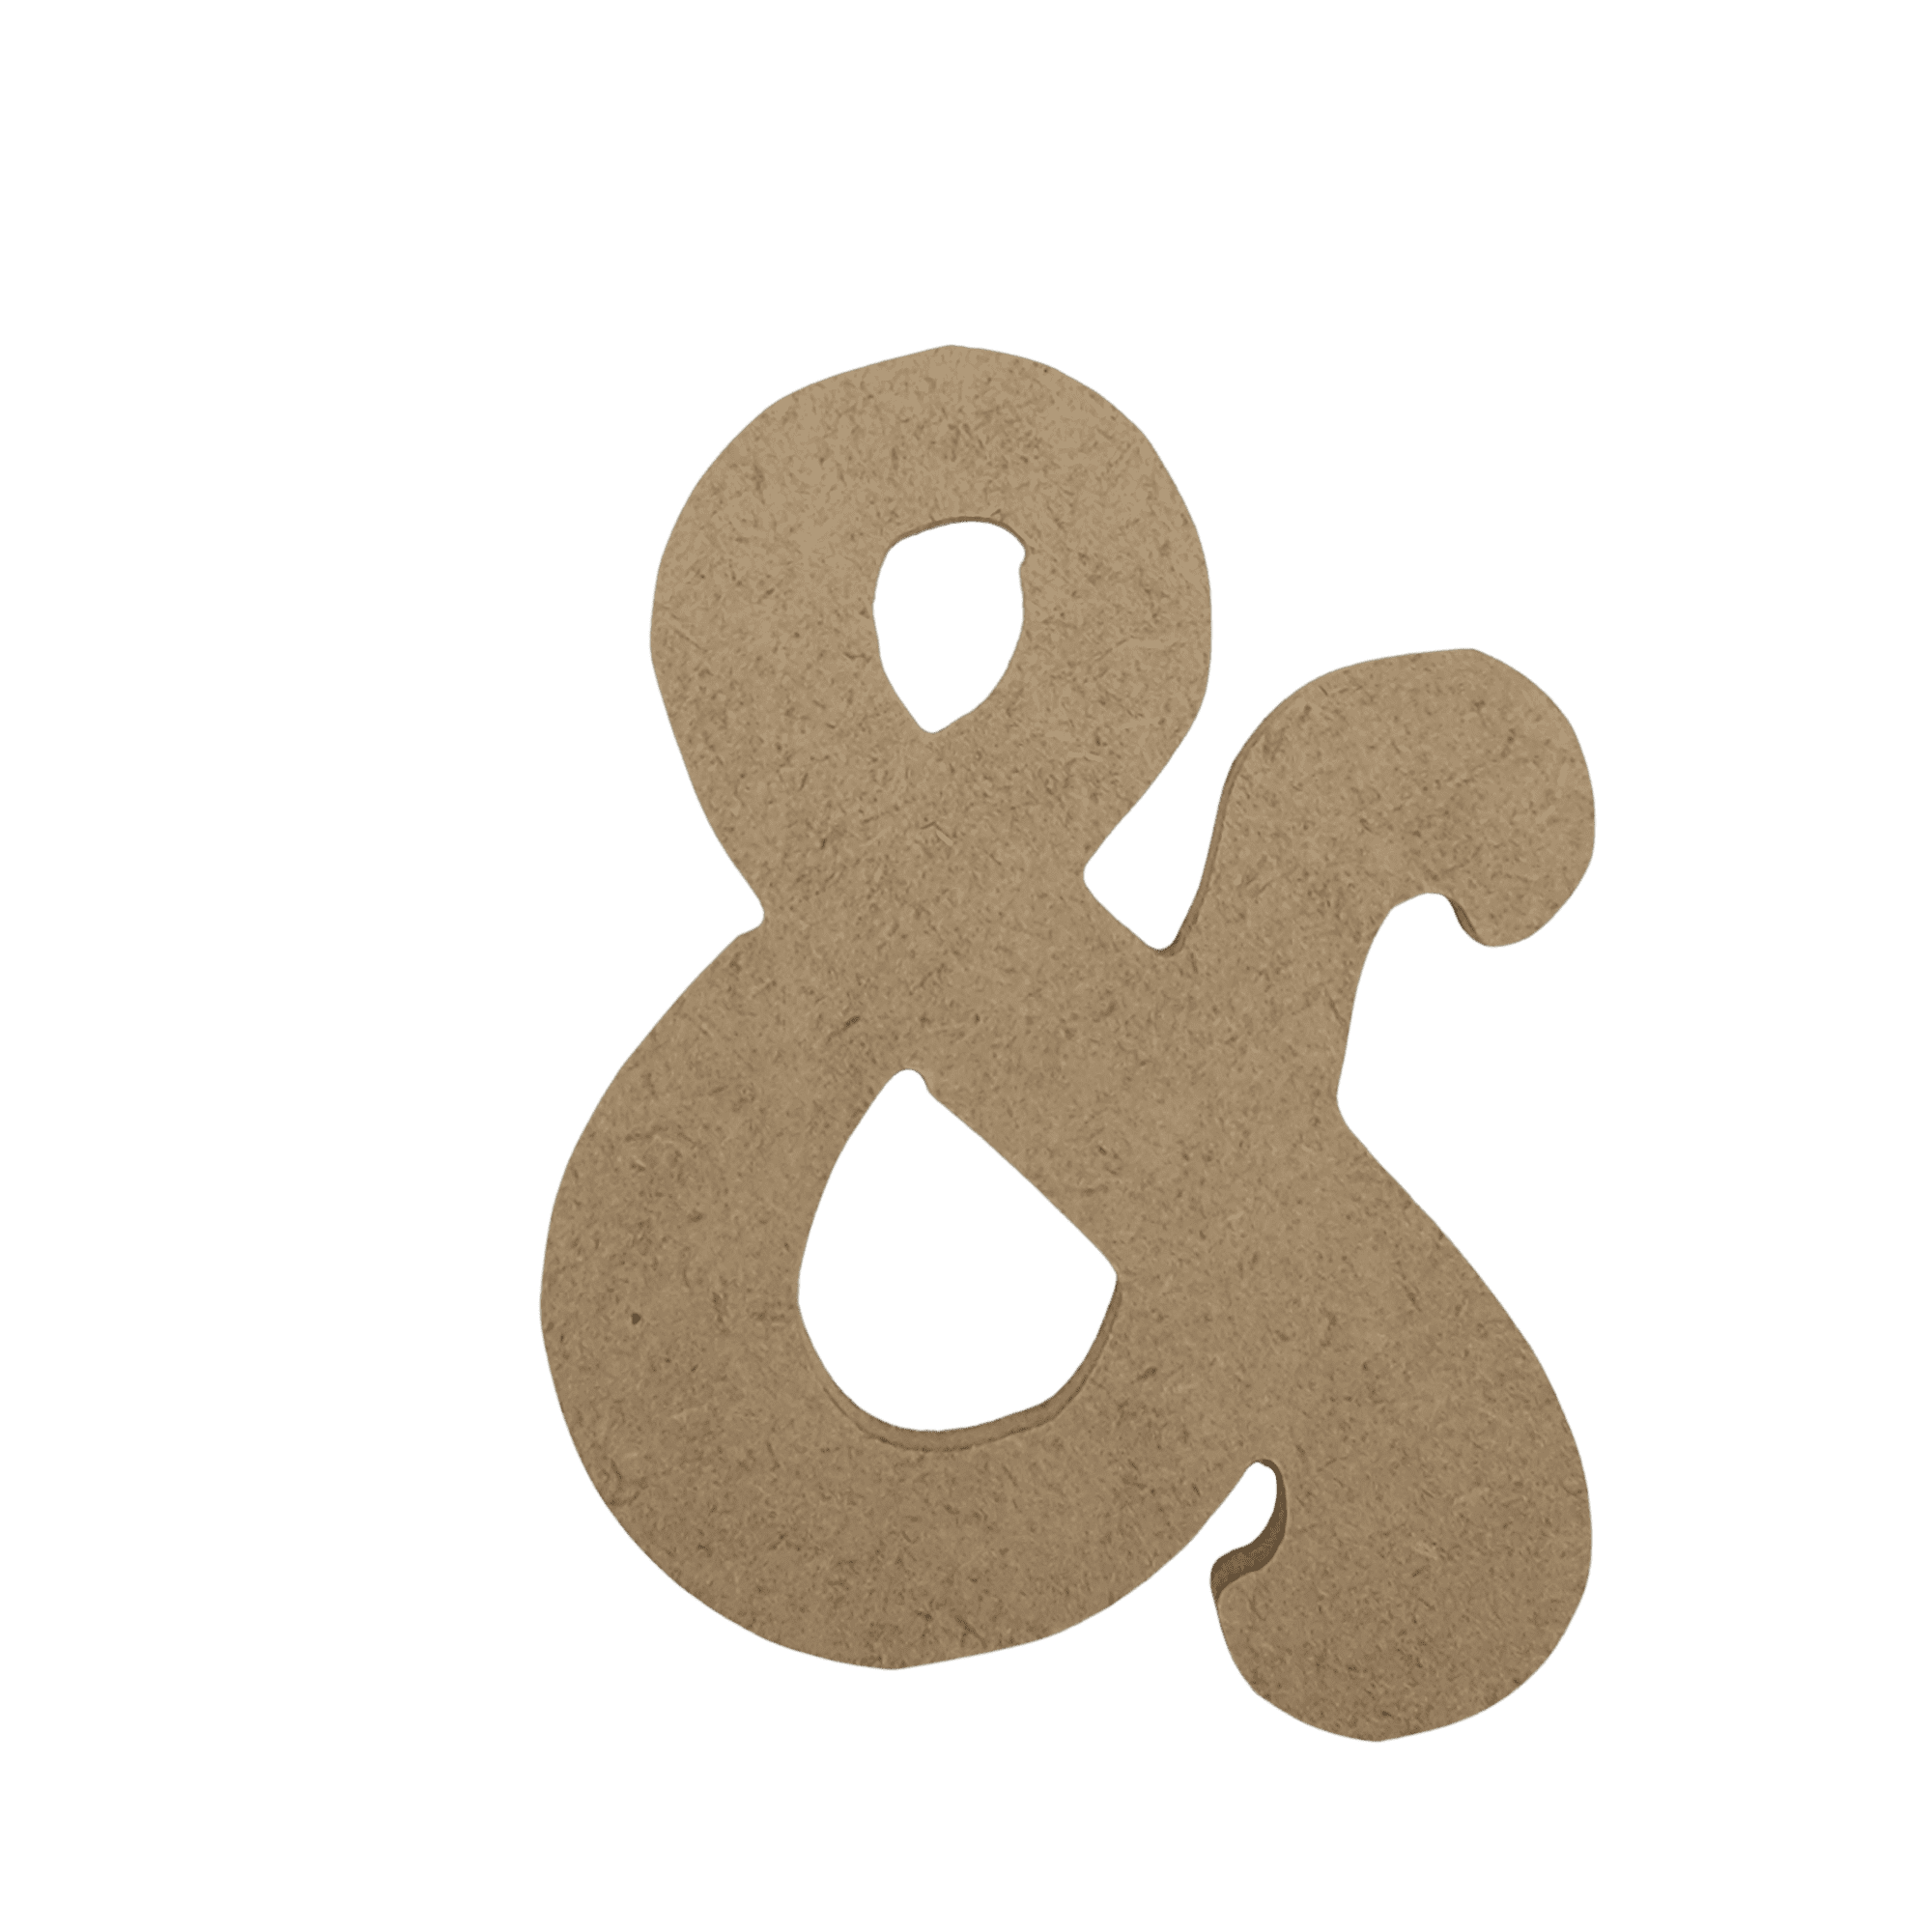 Use For Weddings Craft 8 X & Ampersand Wooden Scrabble Tiles 